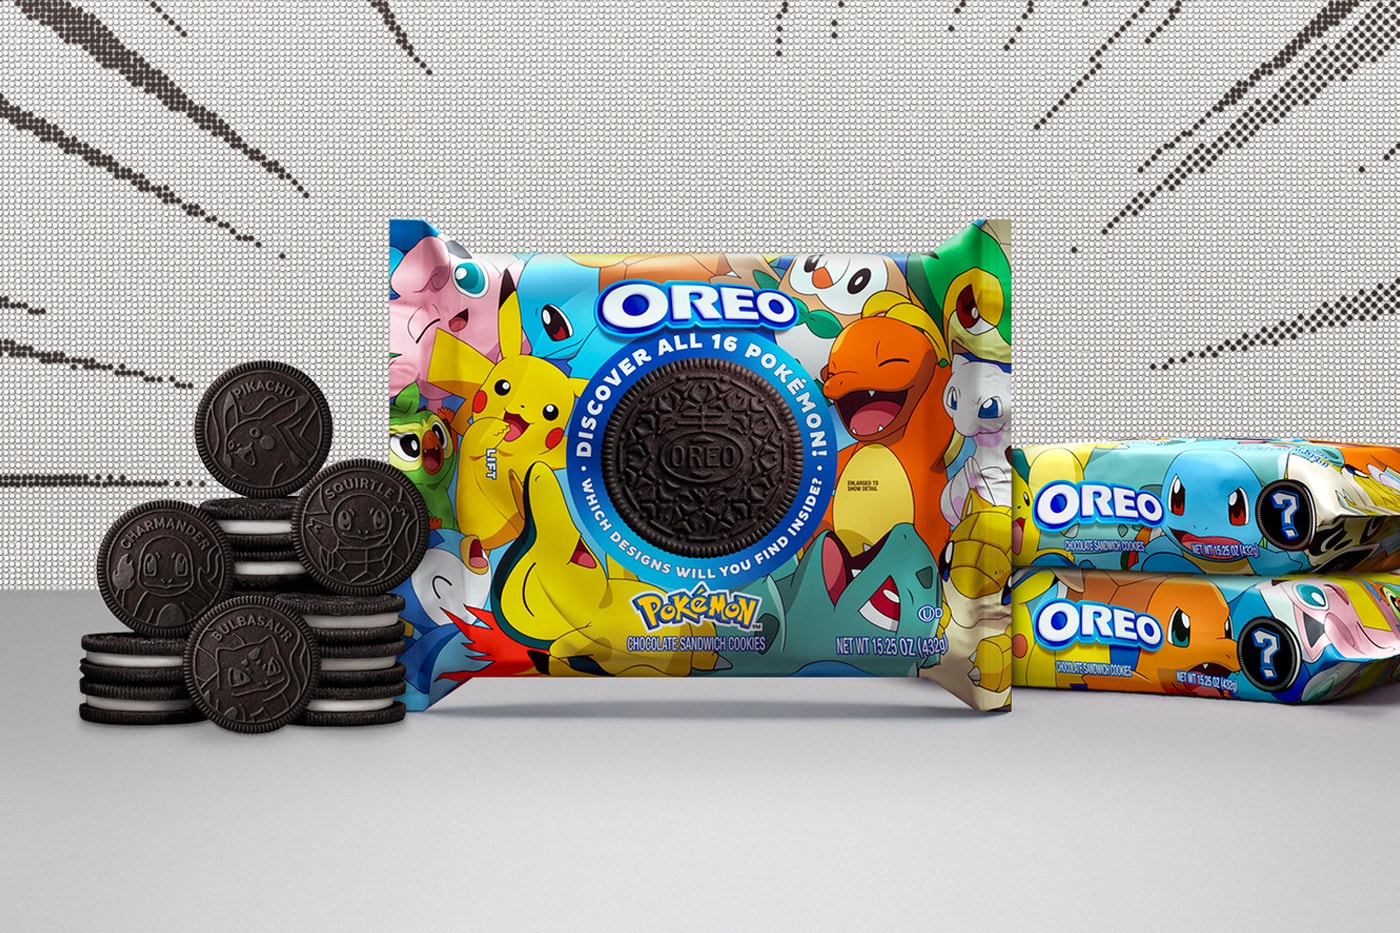 Pokémon Oreo Limited Edition Cookie Collaboration Characters Pikachu Bulbasaur Charmander Squirtle